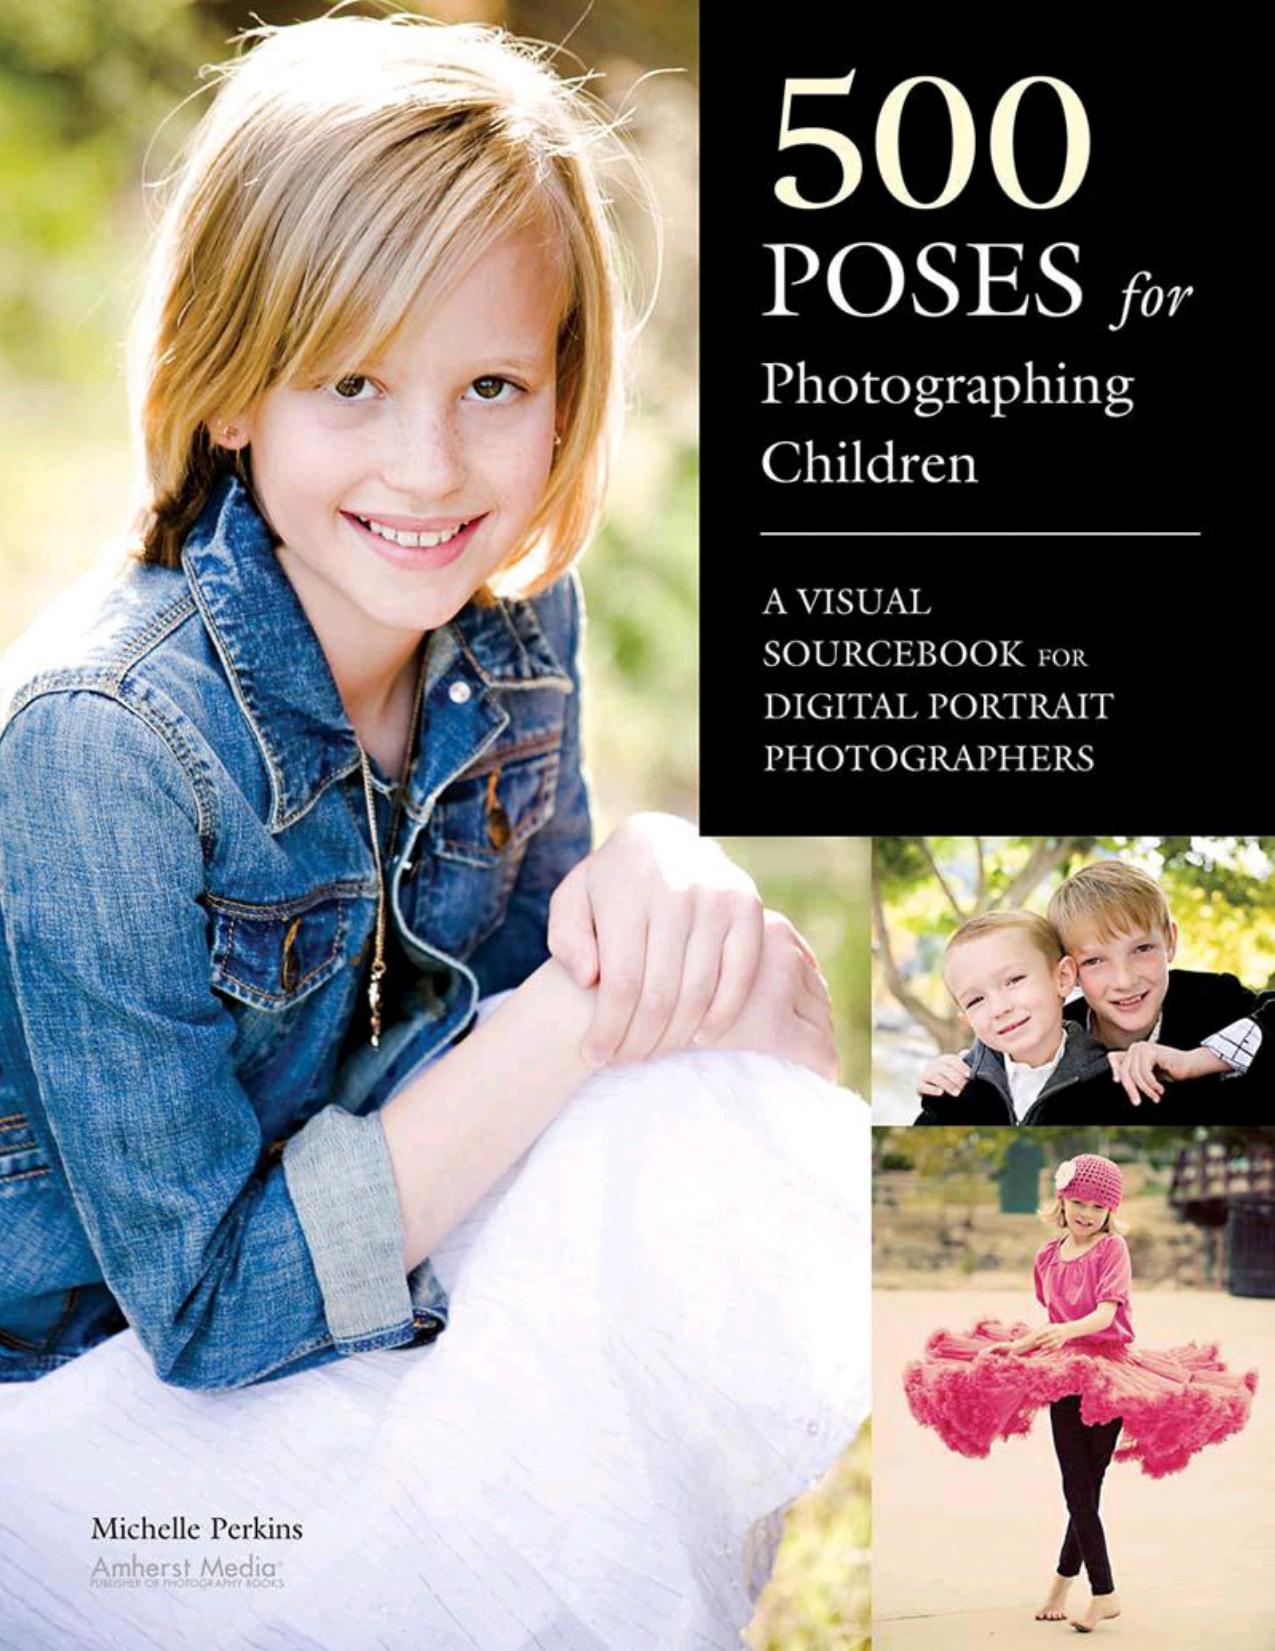 500 Poses for Photographing Children by Michelle Perkins